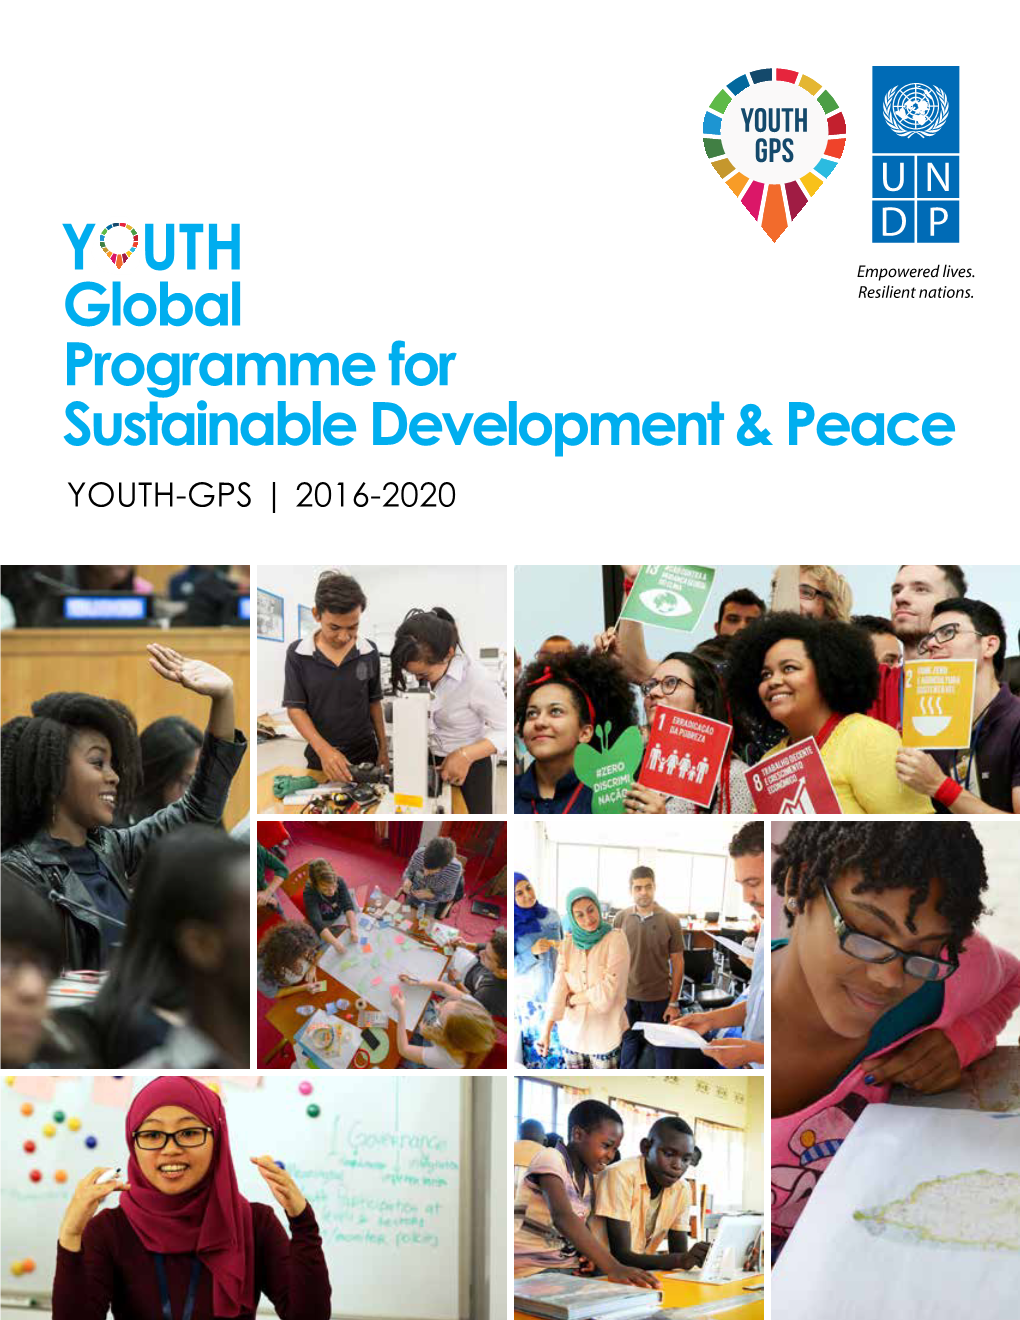 UNDP Youth Global Programme for Sustainable Development and Peace (‘Youth-GPS’, 2016-2020) ATLAS PROJECT NUMBER: 00097302